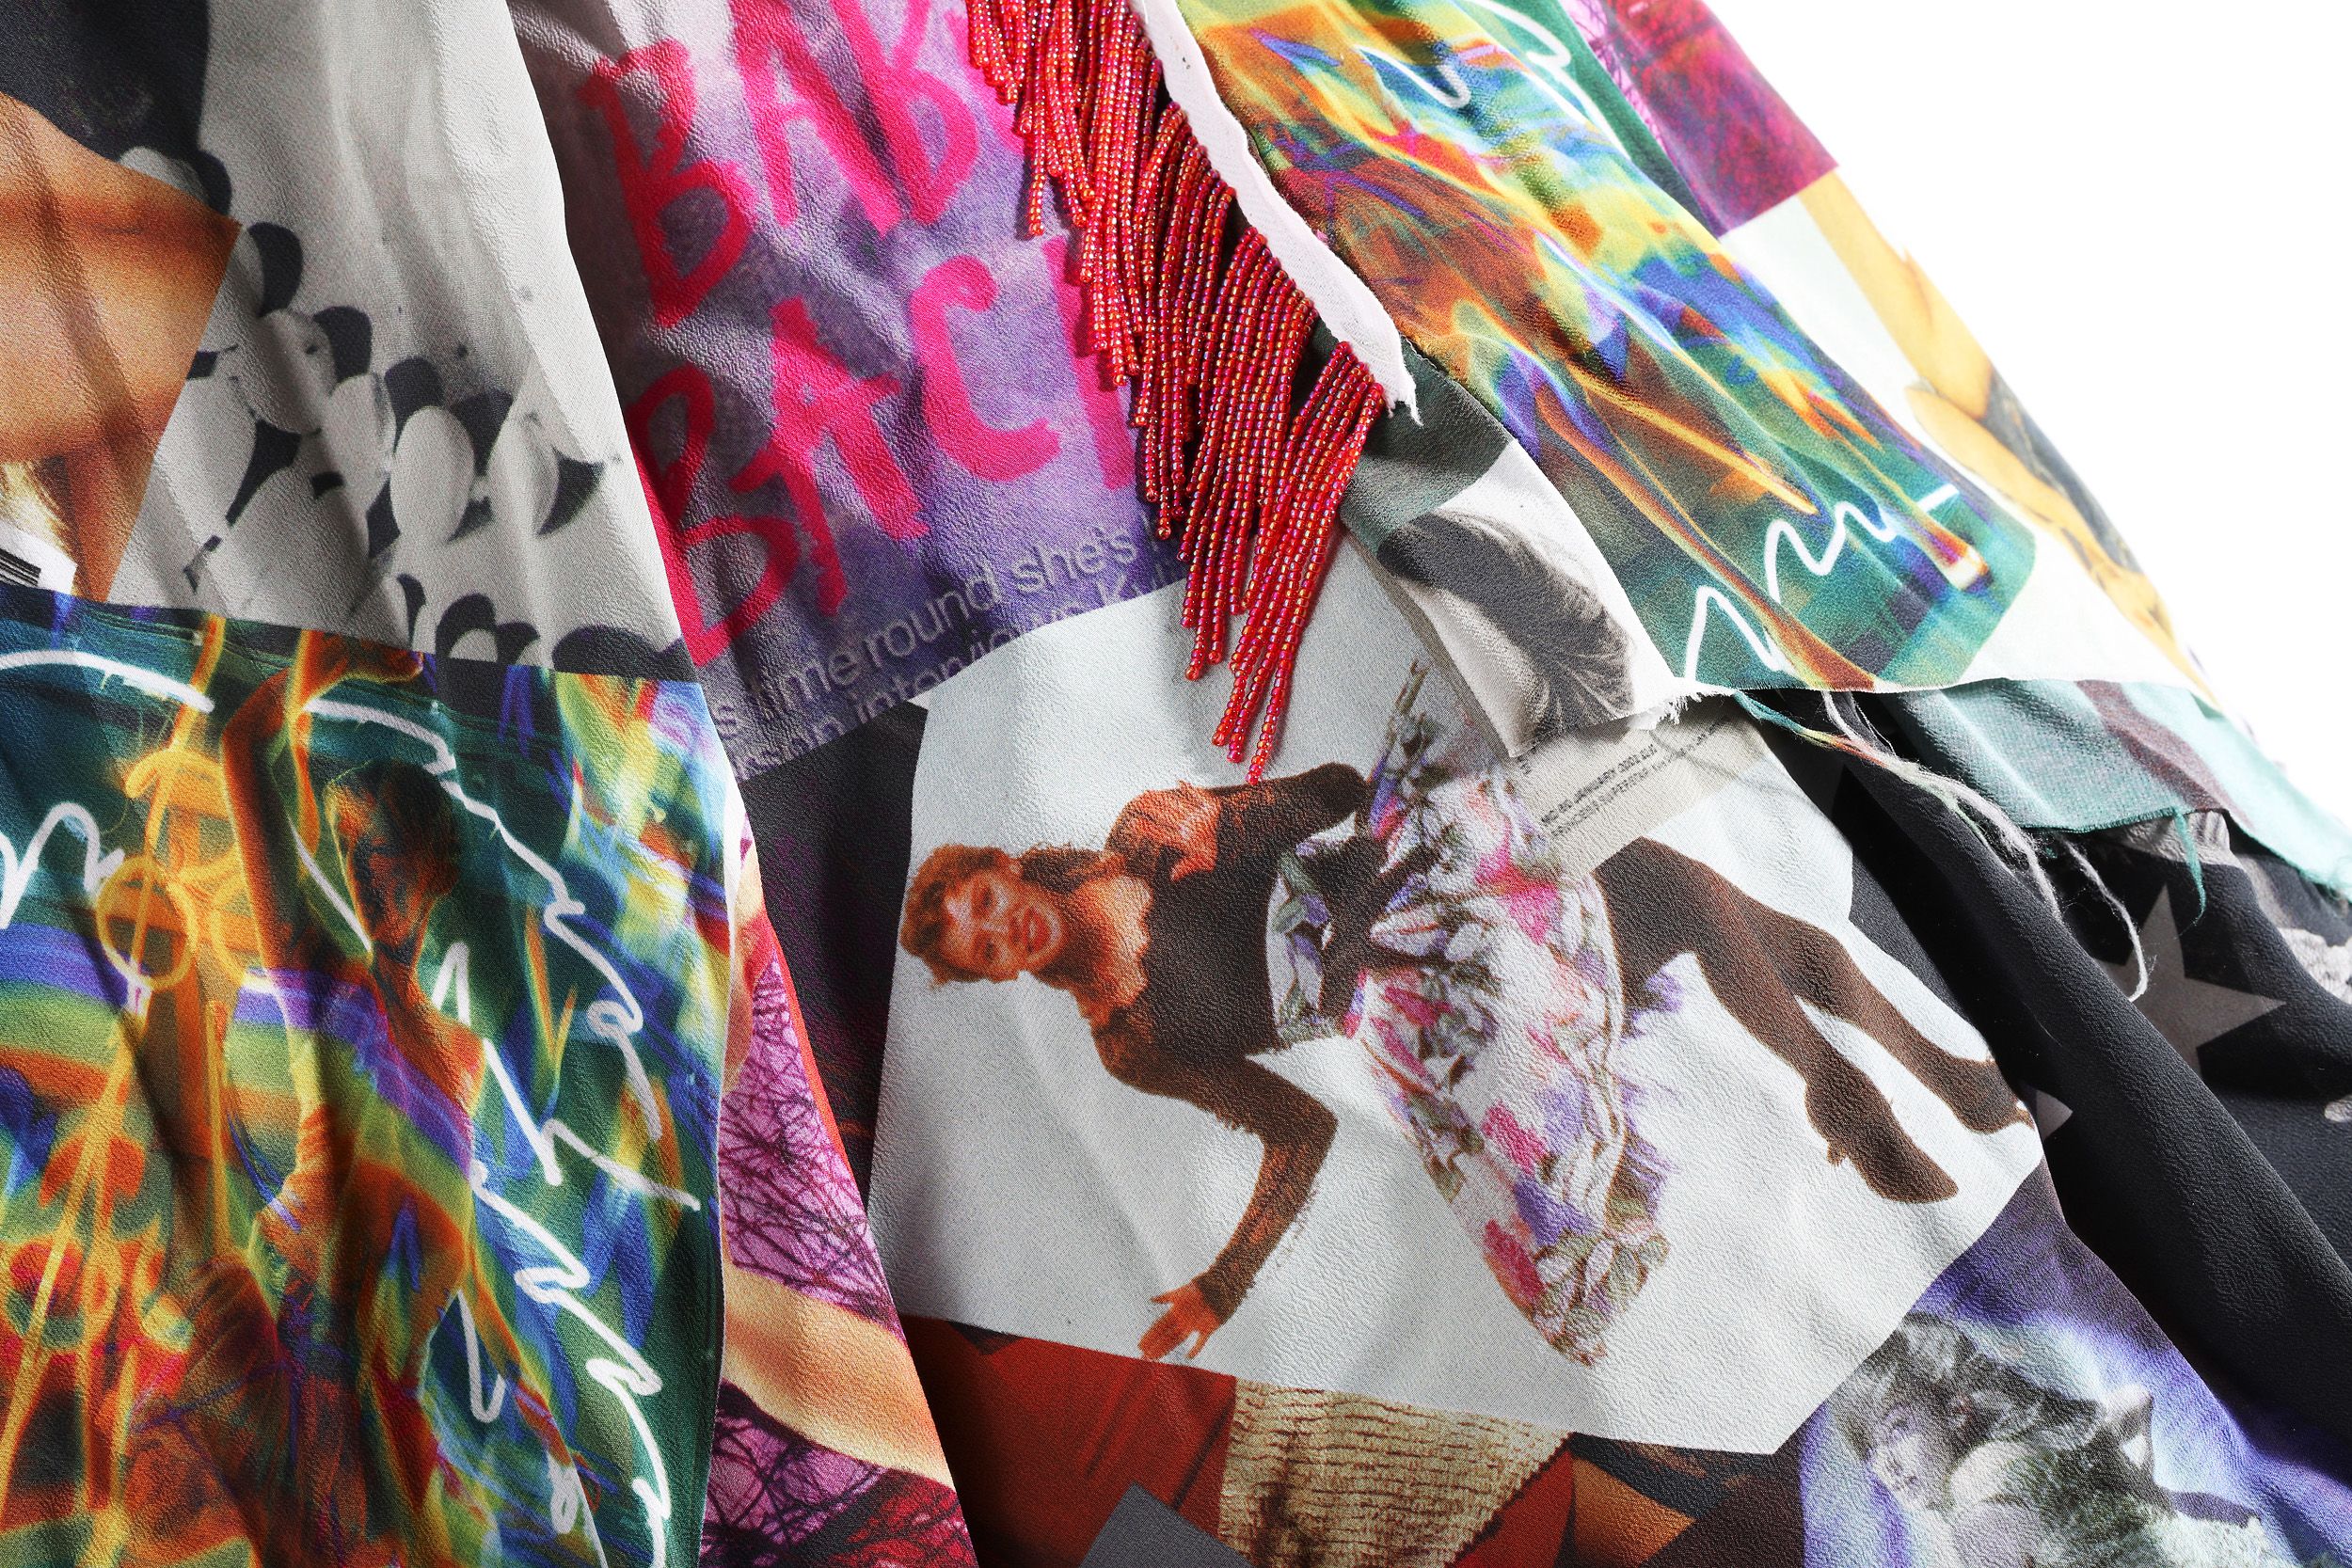 Close up of fabric with images of Kylie Minogue.